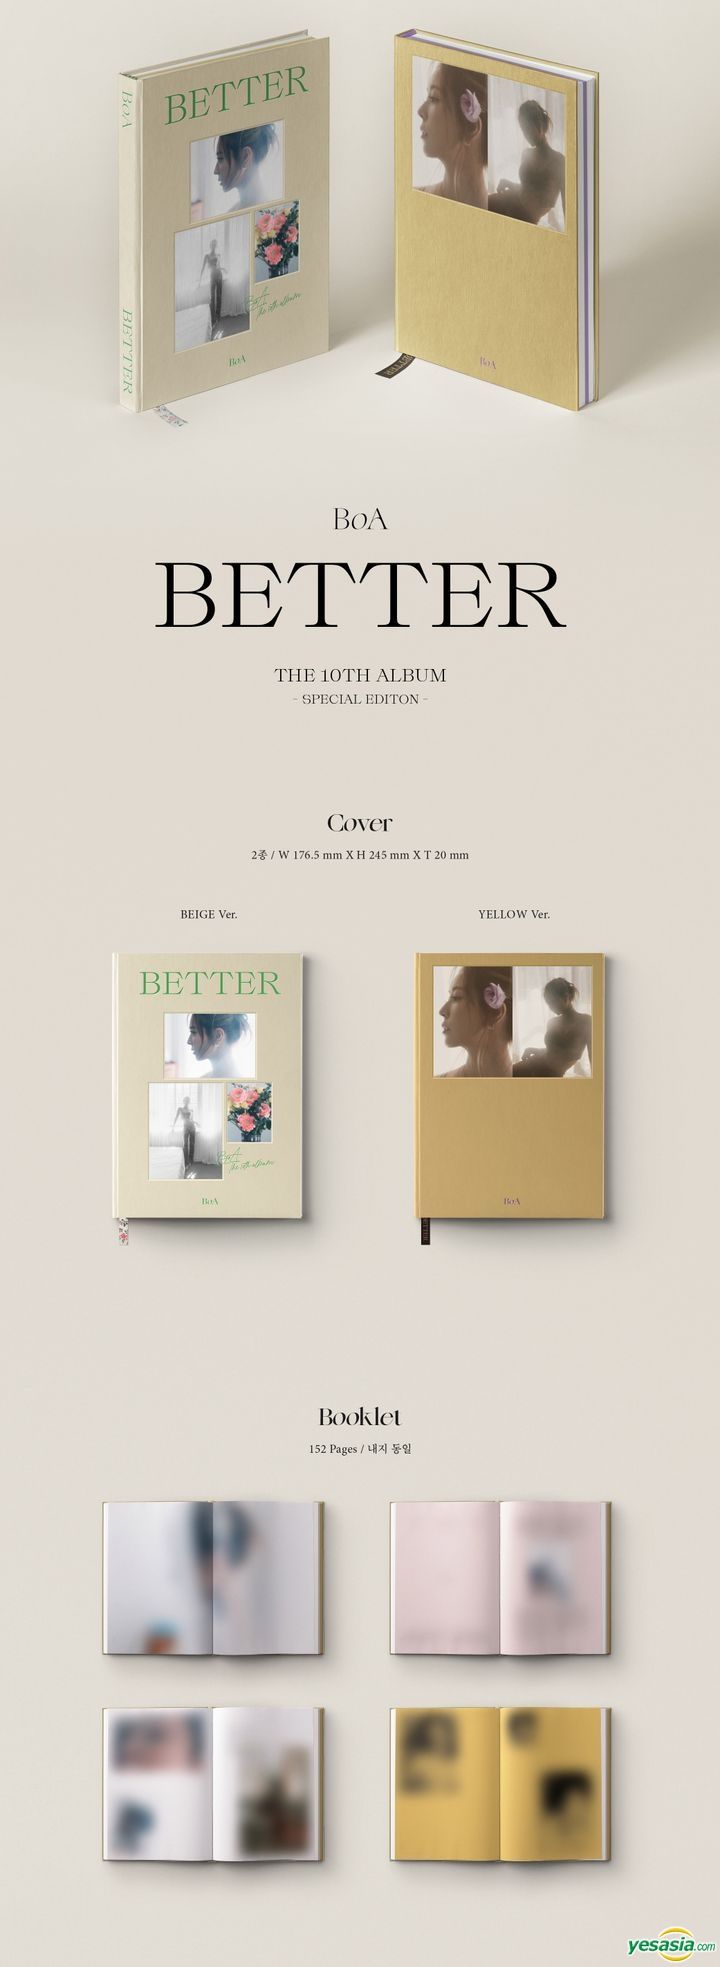 YESASIA: BoA Vol. 10 - Better (Special Edition) (First Press 